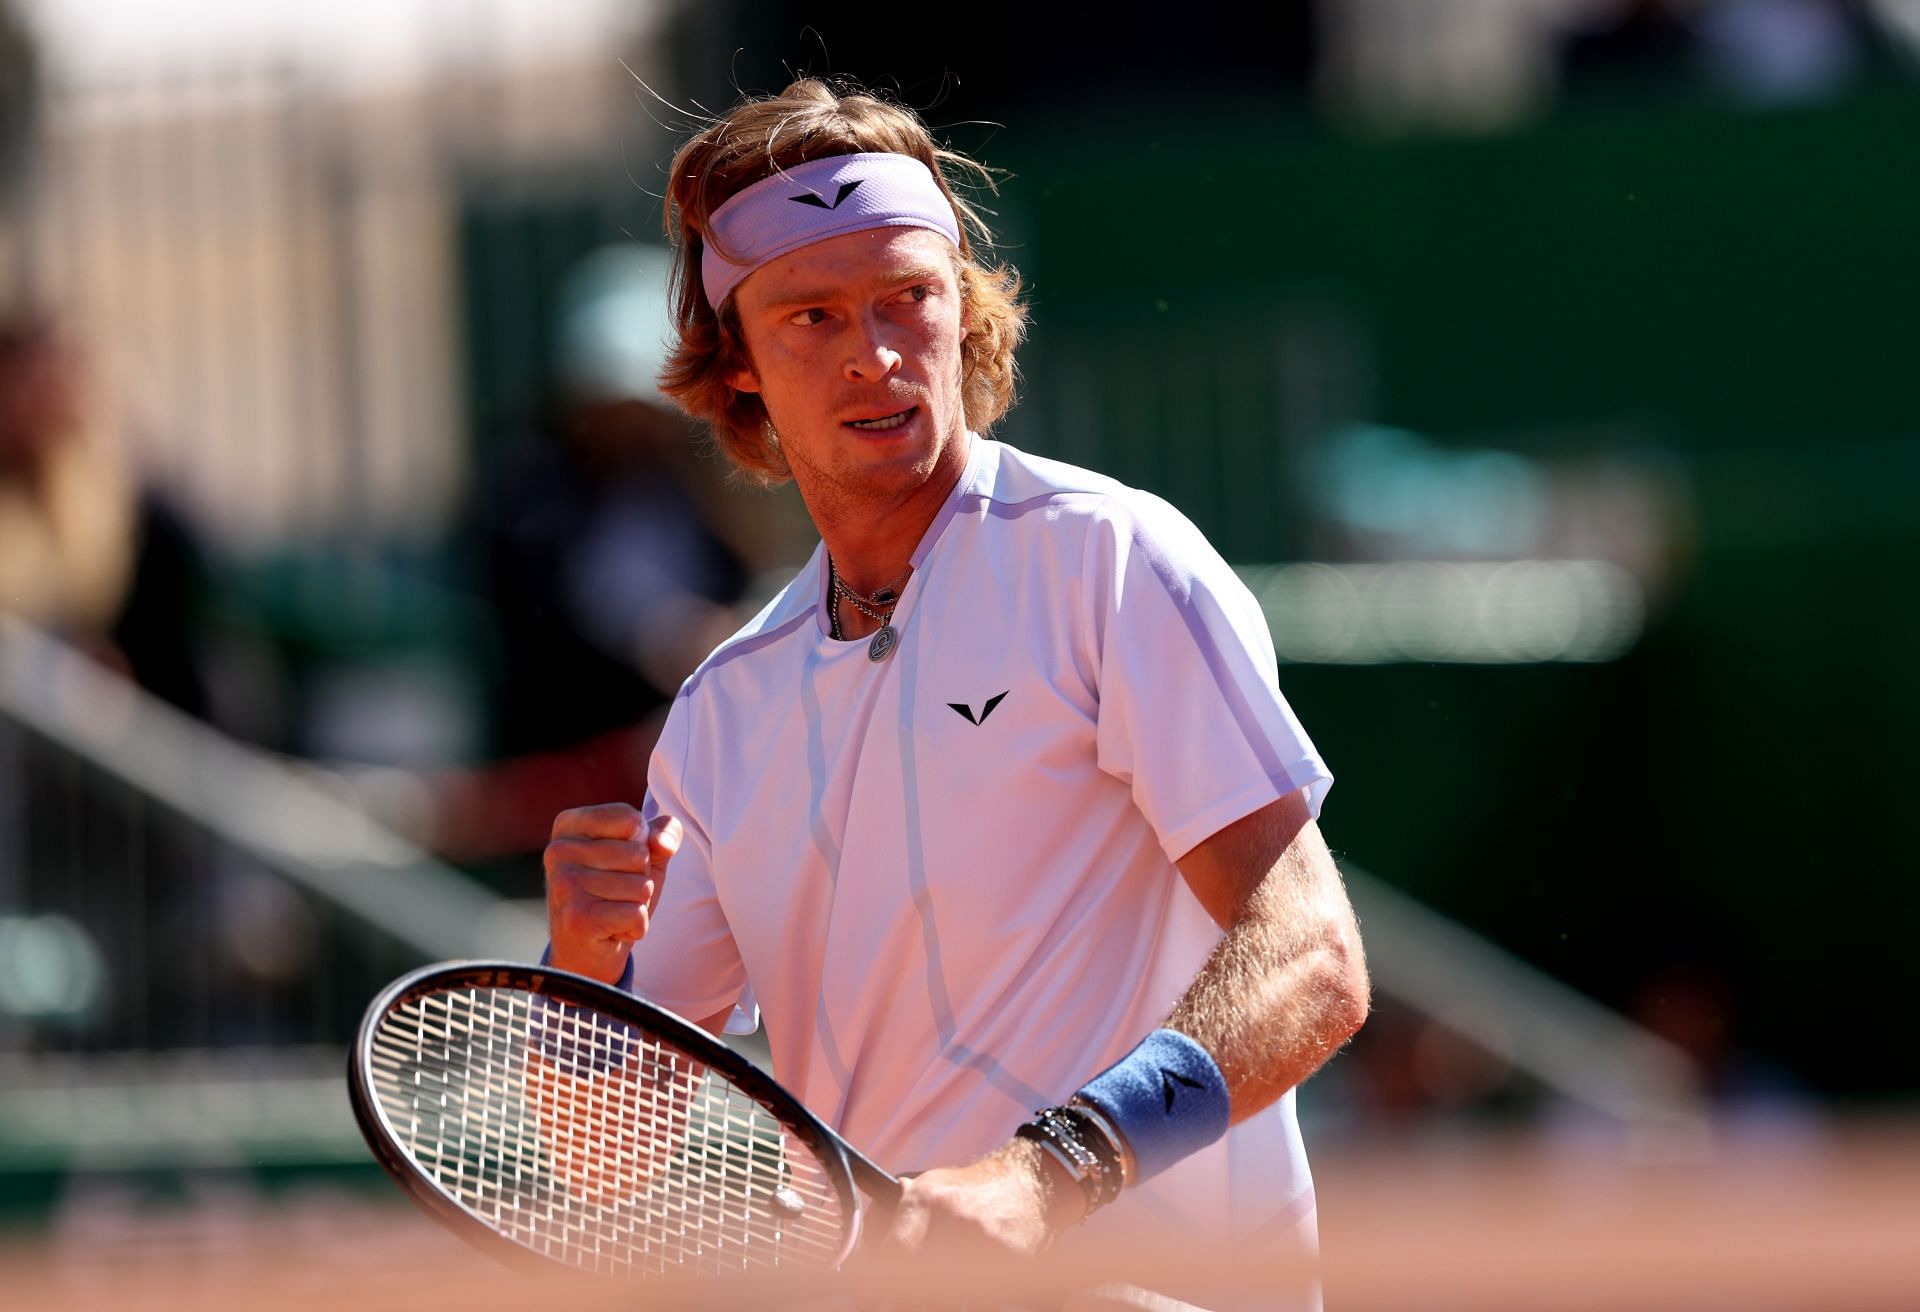 Monte-Carlo Masters 2023 Schedule Today TV schedule, start time, order of play, live stream details and more Day 7